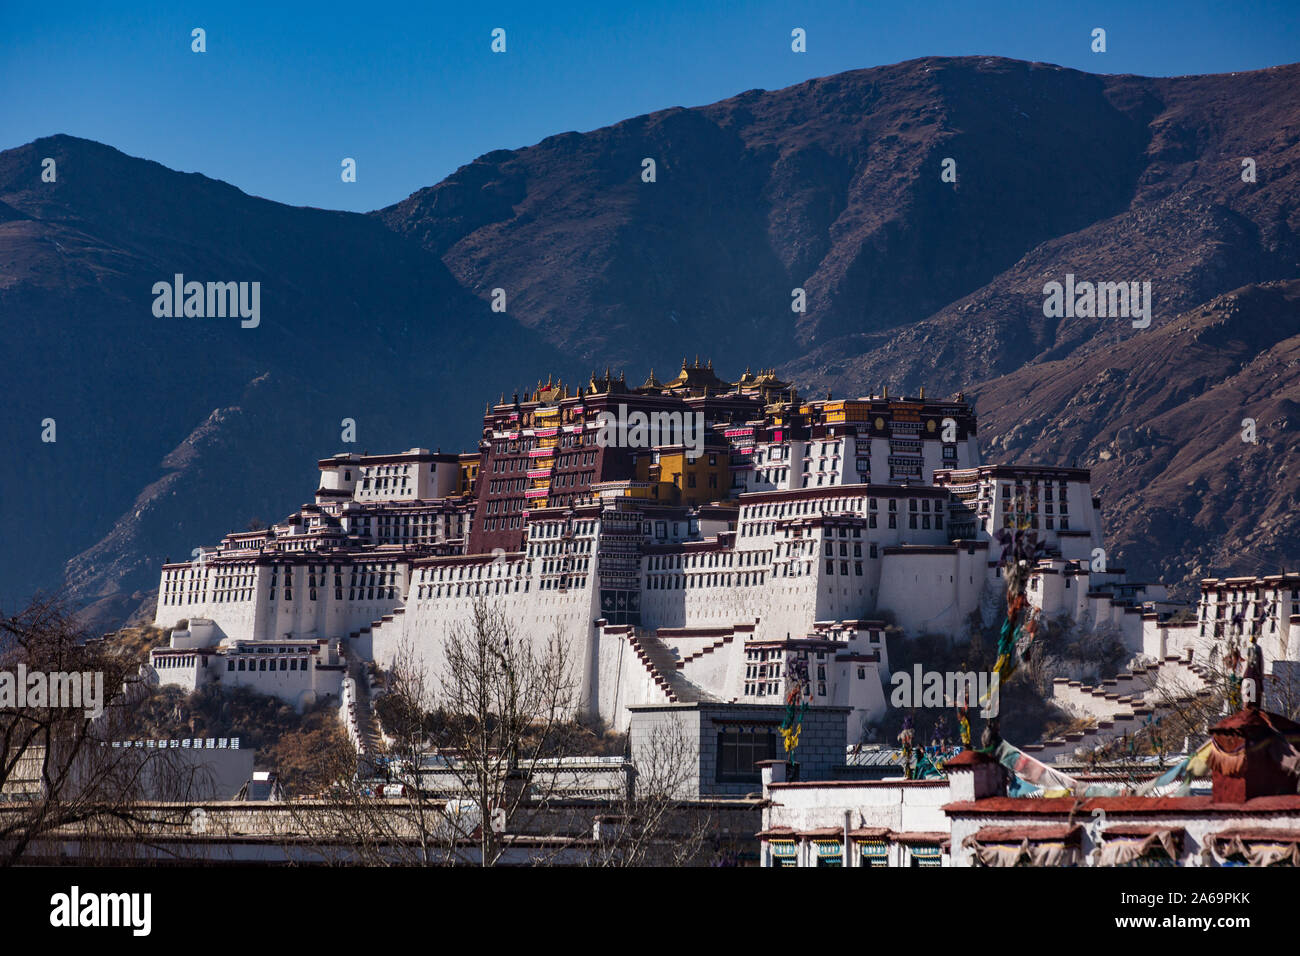 The Potala Palace was founded about 1645 A.D. and was the former summer palace of the Dalai Lama and is a UNESCO World Heritage Site in Lhasa, Tibet. Stock Photo